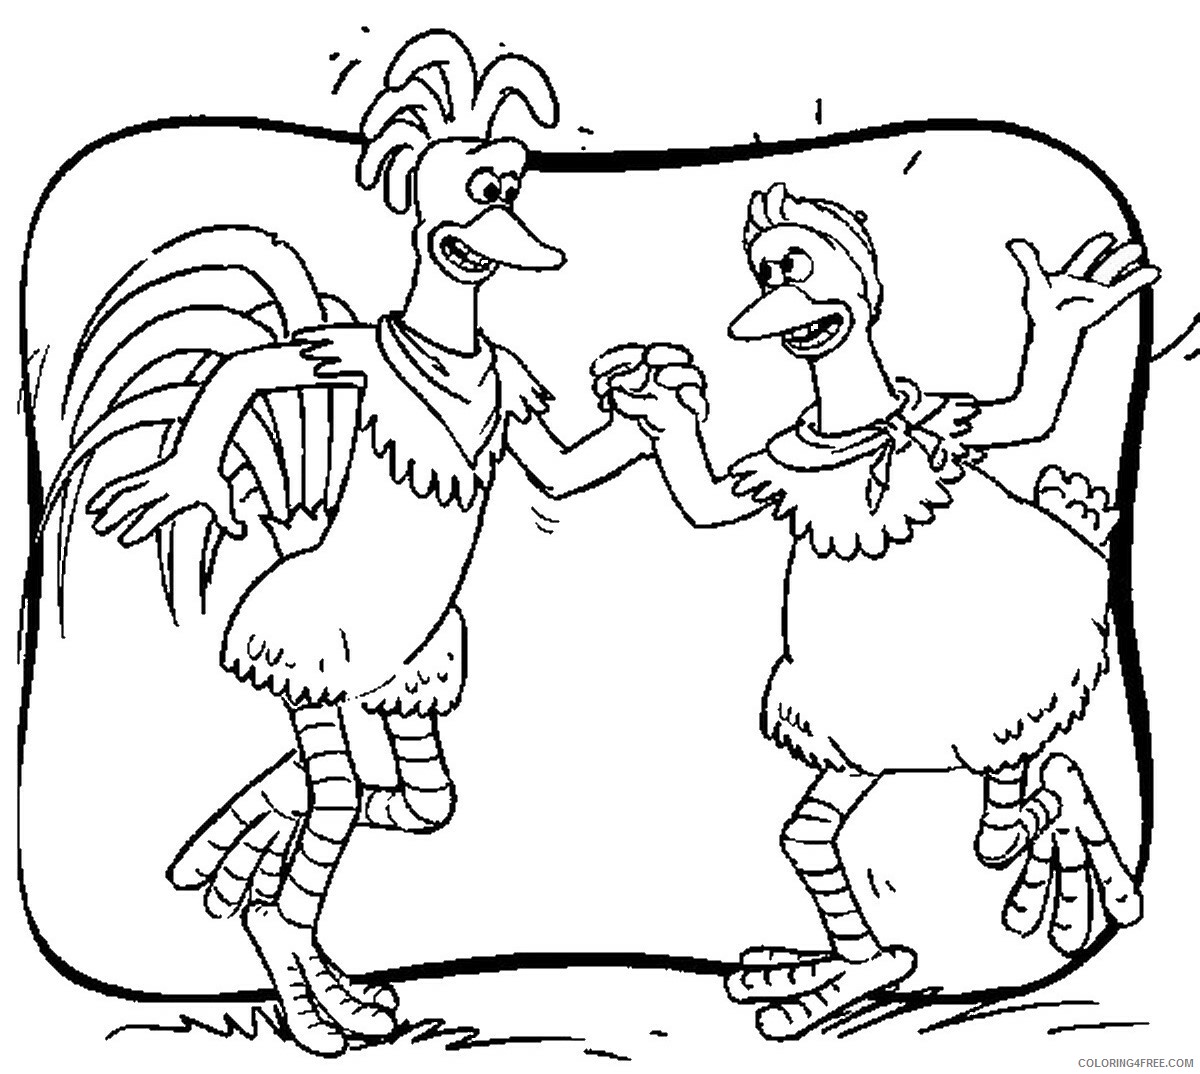 Chicken Run Coloring Pages TV Film chicken_run_cl30 Printable 2020 02129 Coloring4free